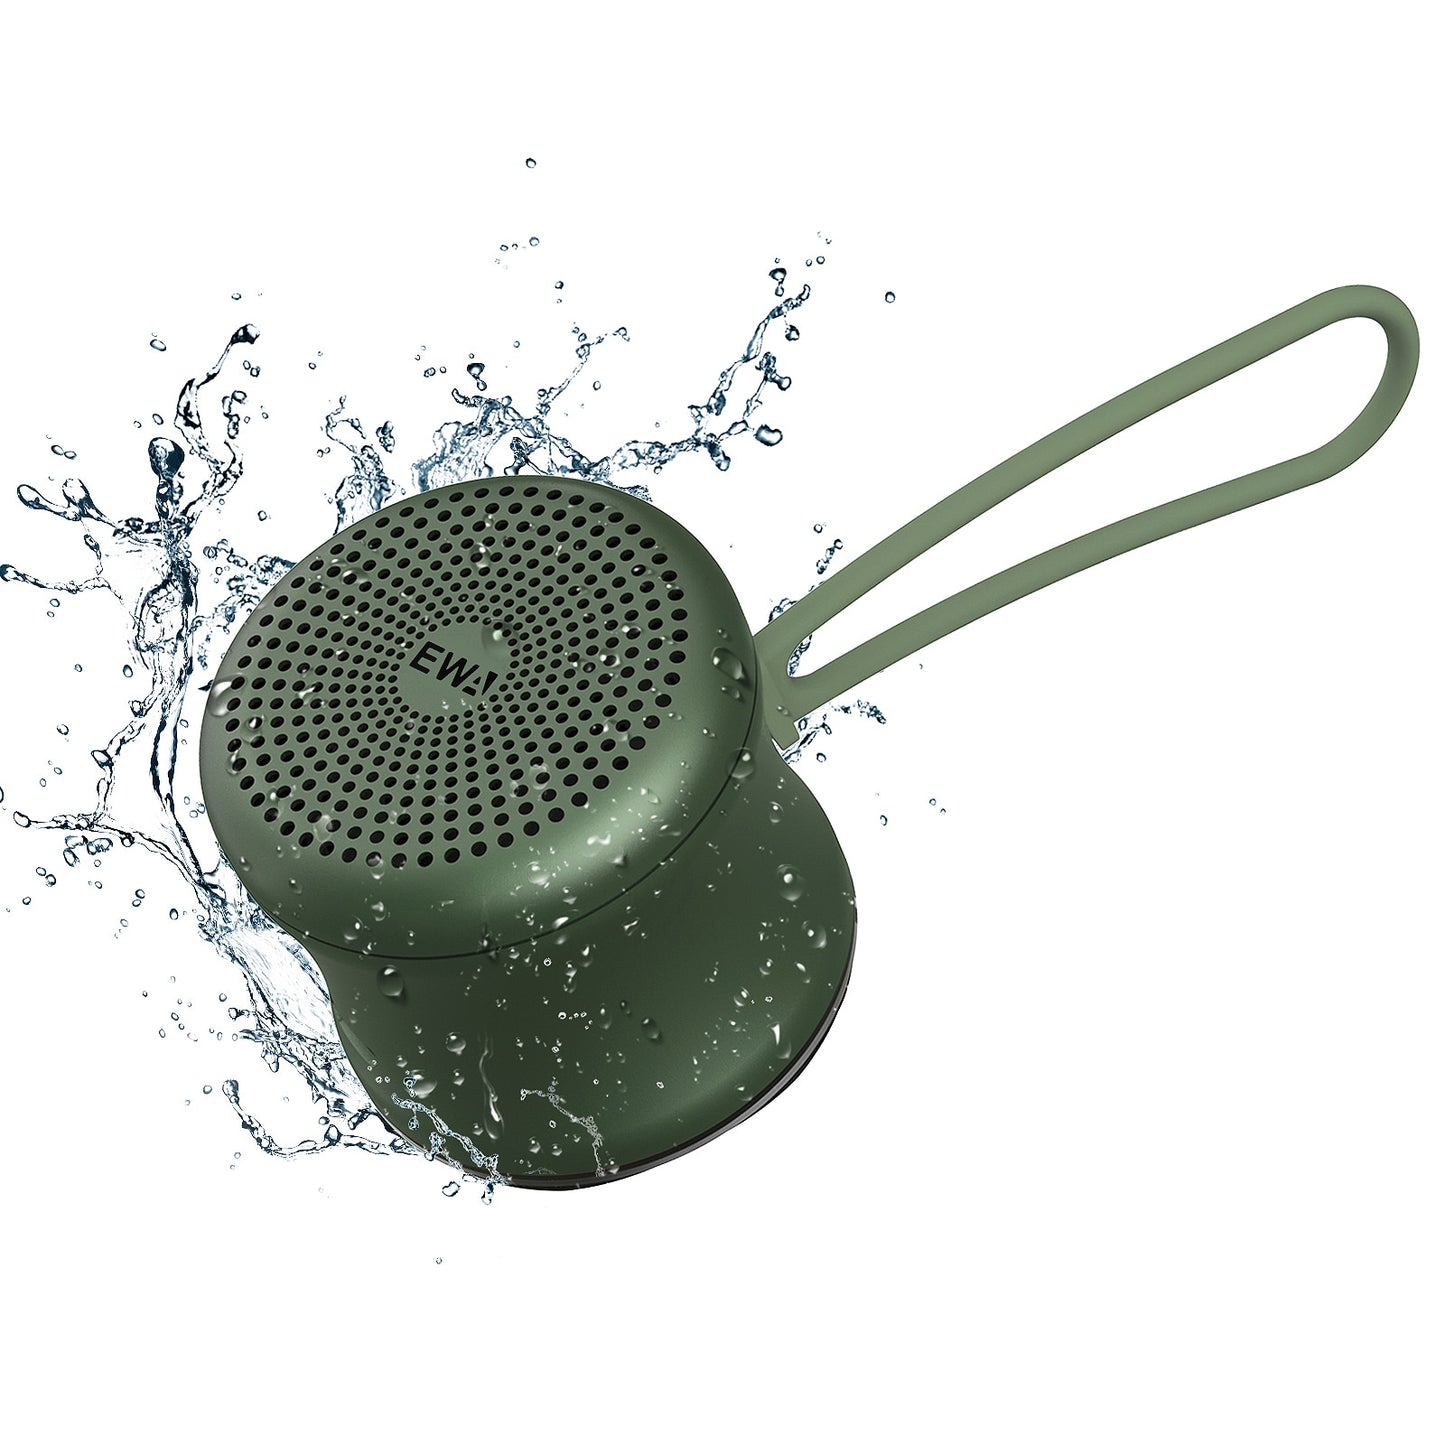 Mini Bluetooth Speaker - Enhanced with Custom Bass Radiator, IPX7 Waterproof, Ultra-Portable Design, and Travel Case Included